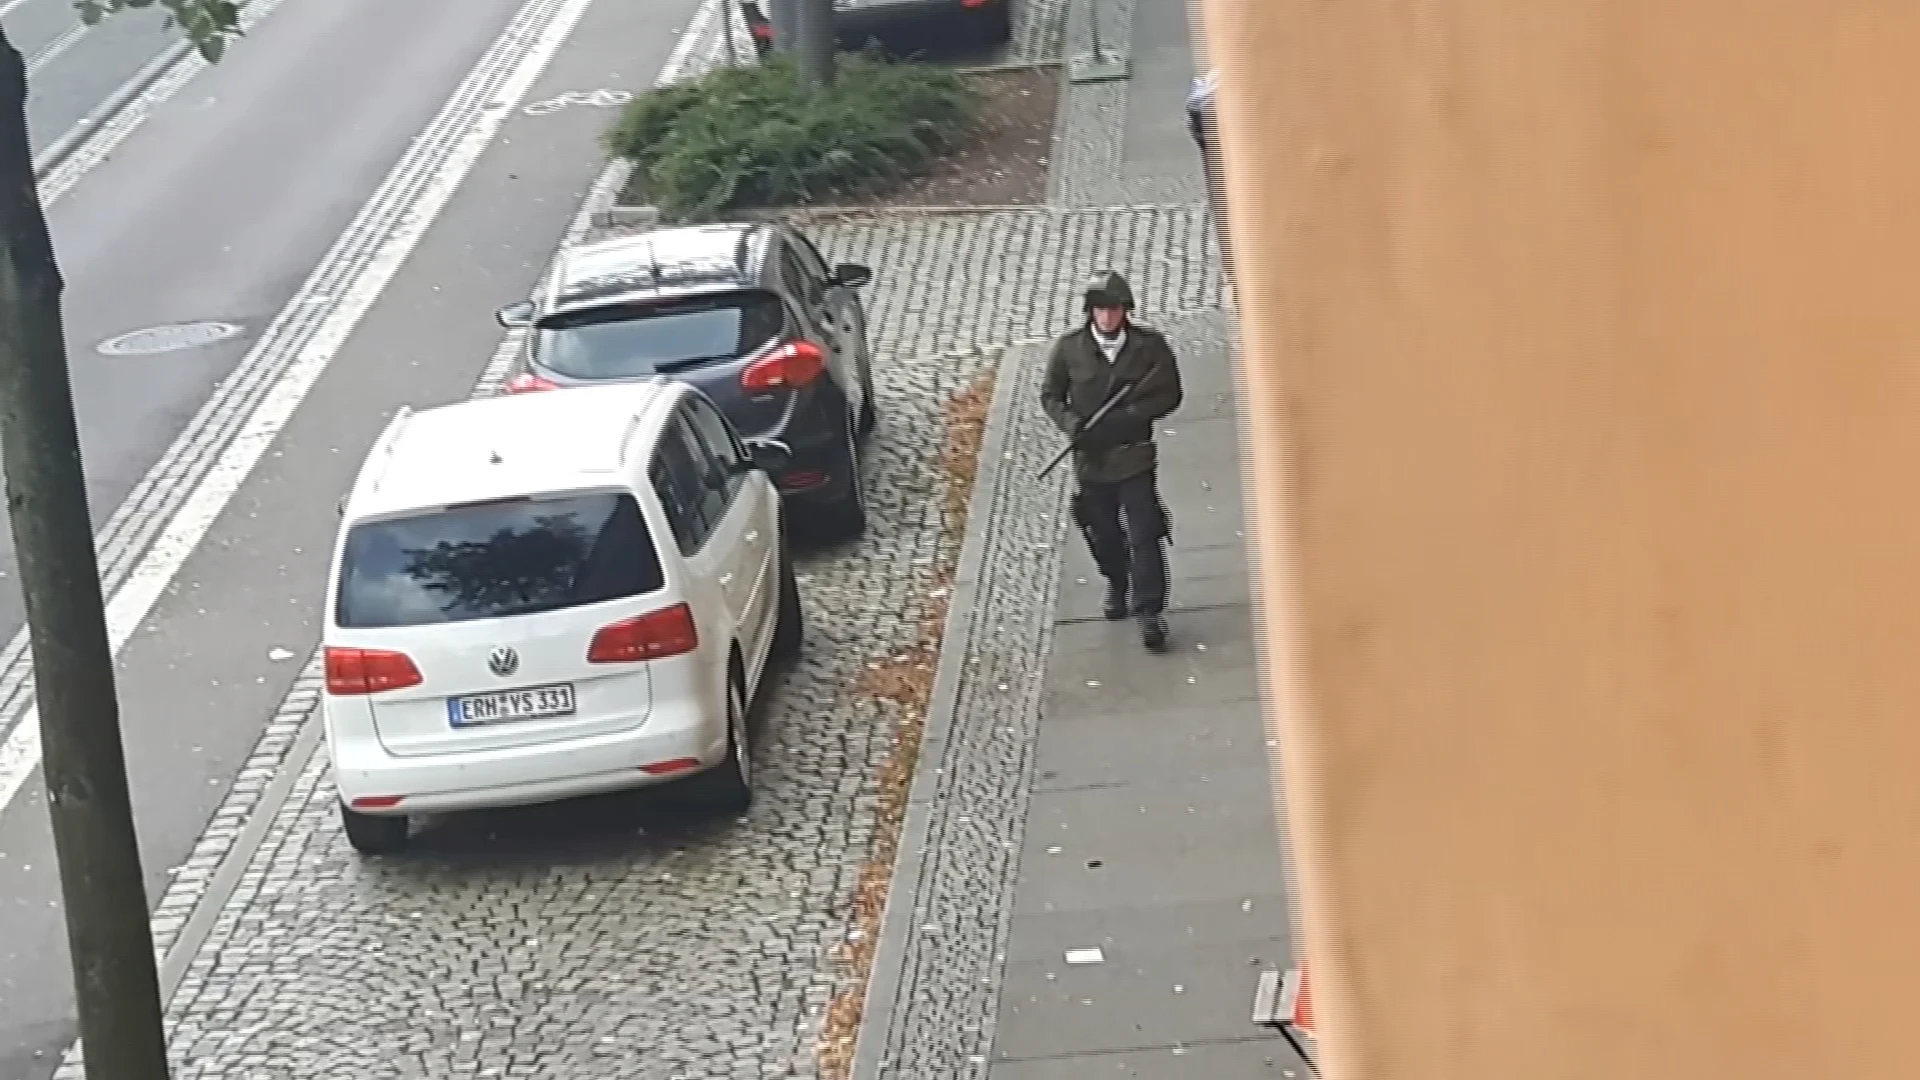 Amateur Video Shows Shooting In Halle